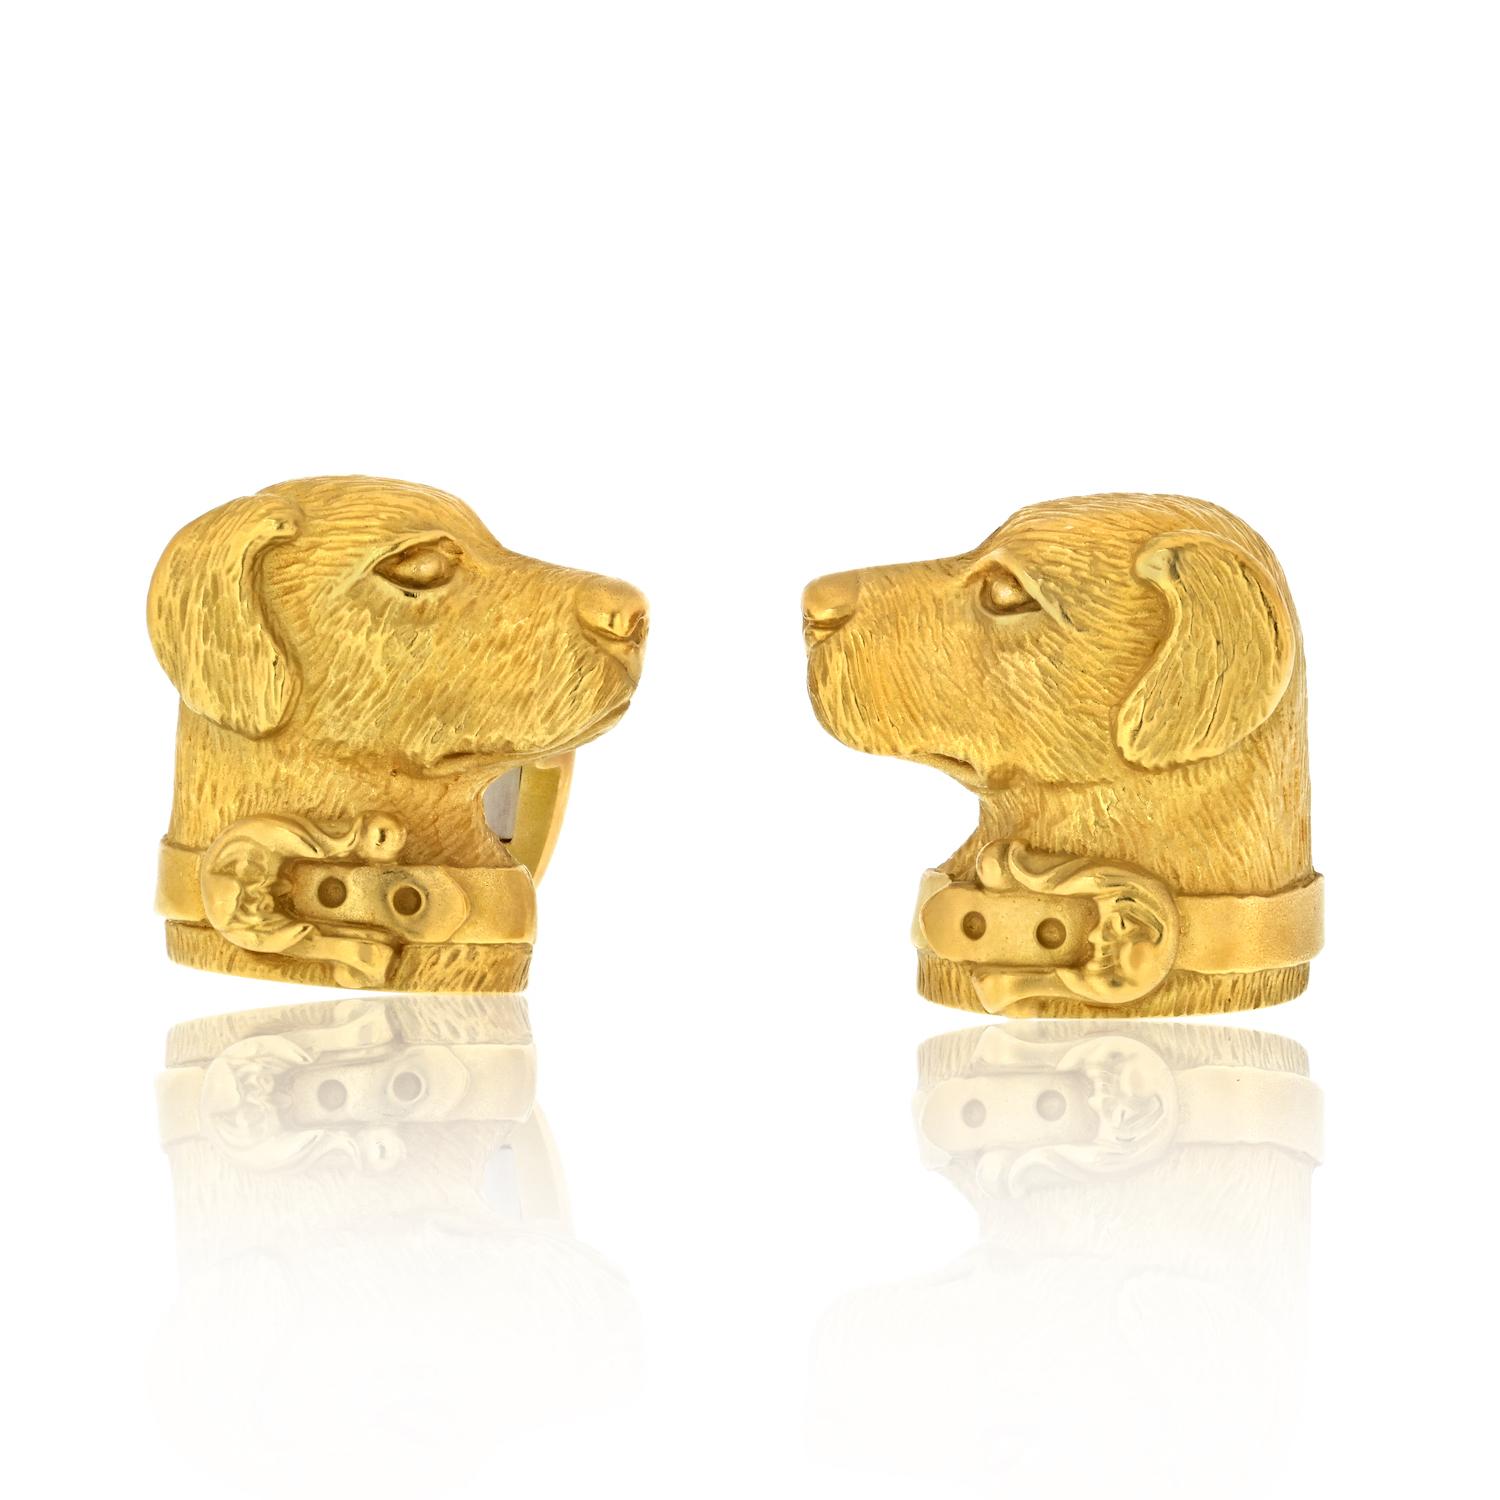 These exquisite Kieselstein-Cord cufflinks portray Labrador dogs adorned with elegant collars, skillfully crafted in textured 18k yellow gold. Created in the United States around 1989, these cufflinks showcase meticulous detailing and a touch of